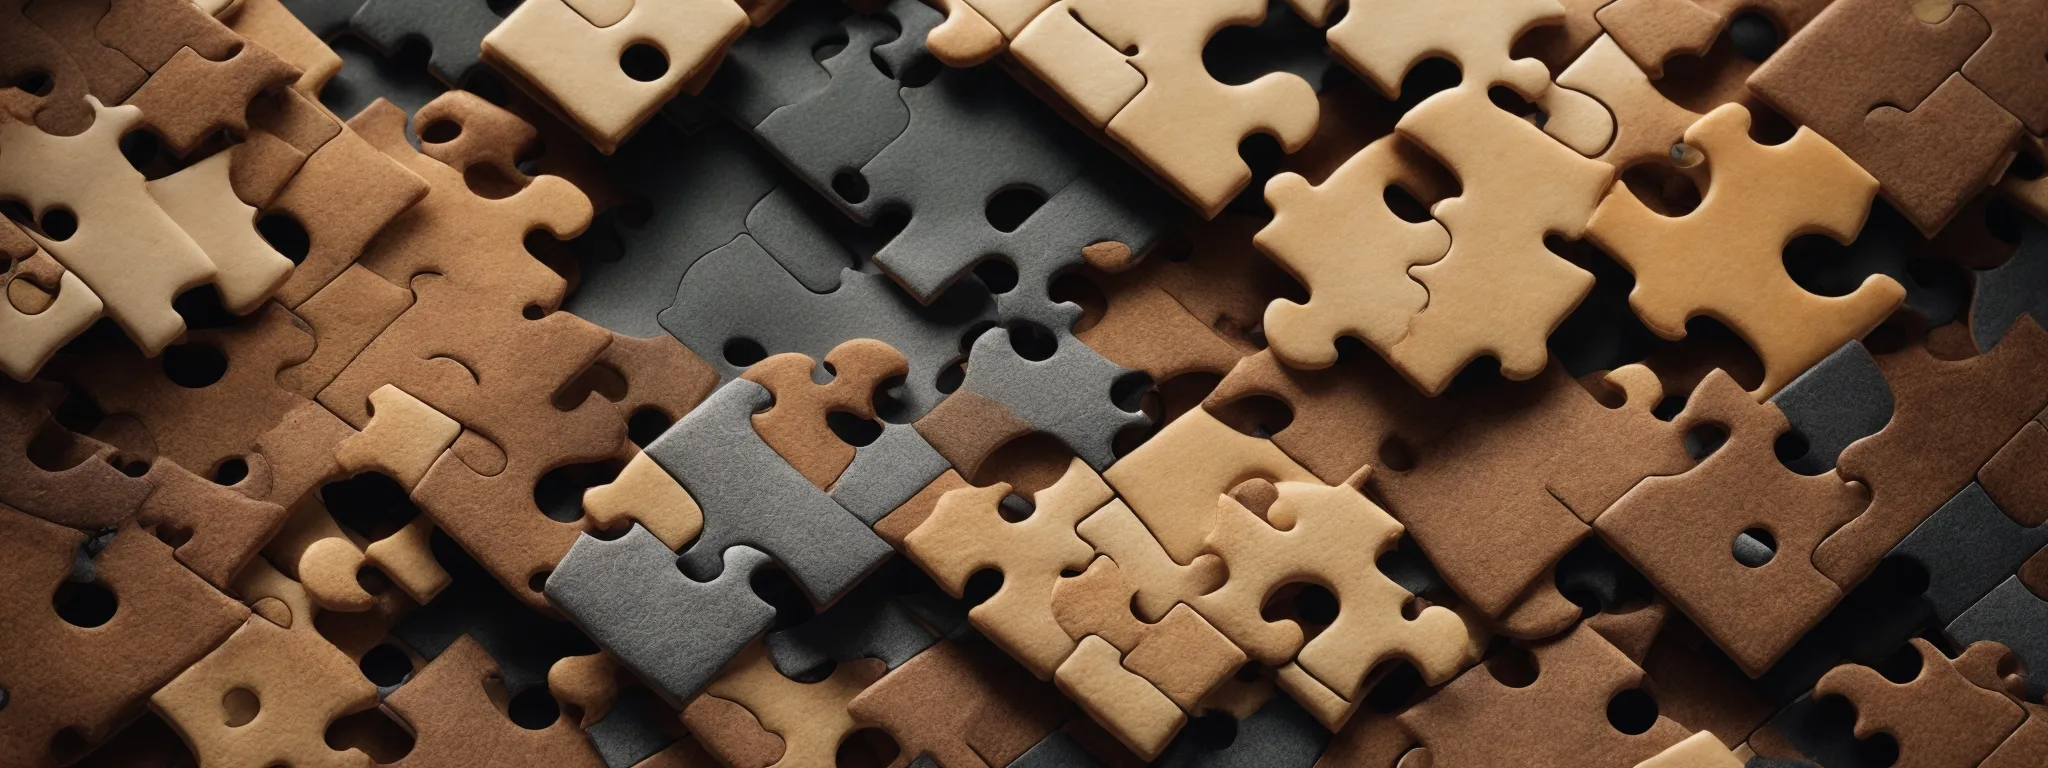 a group of diverse websites depicted as puzzle pieces interlocking seamlessly, to symbolize multiple domains connected by structured data strategies.